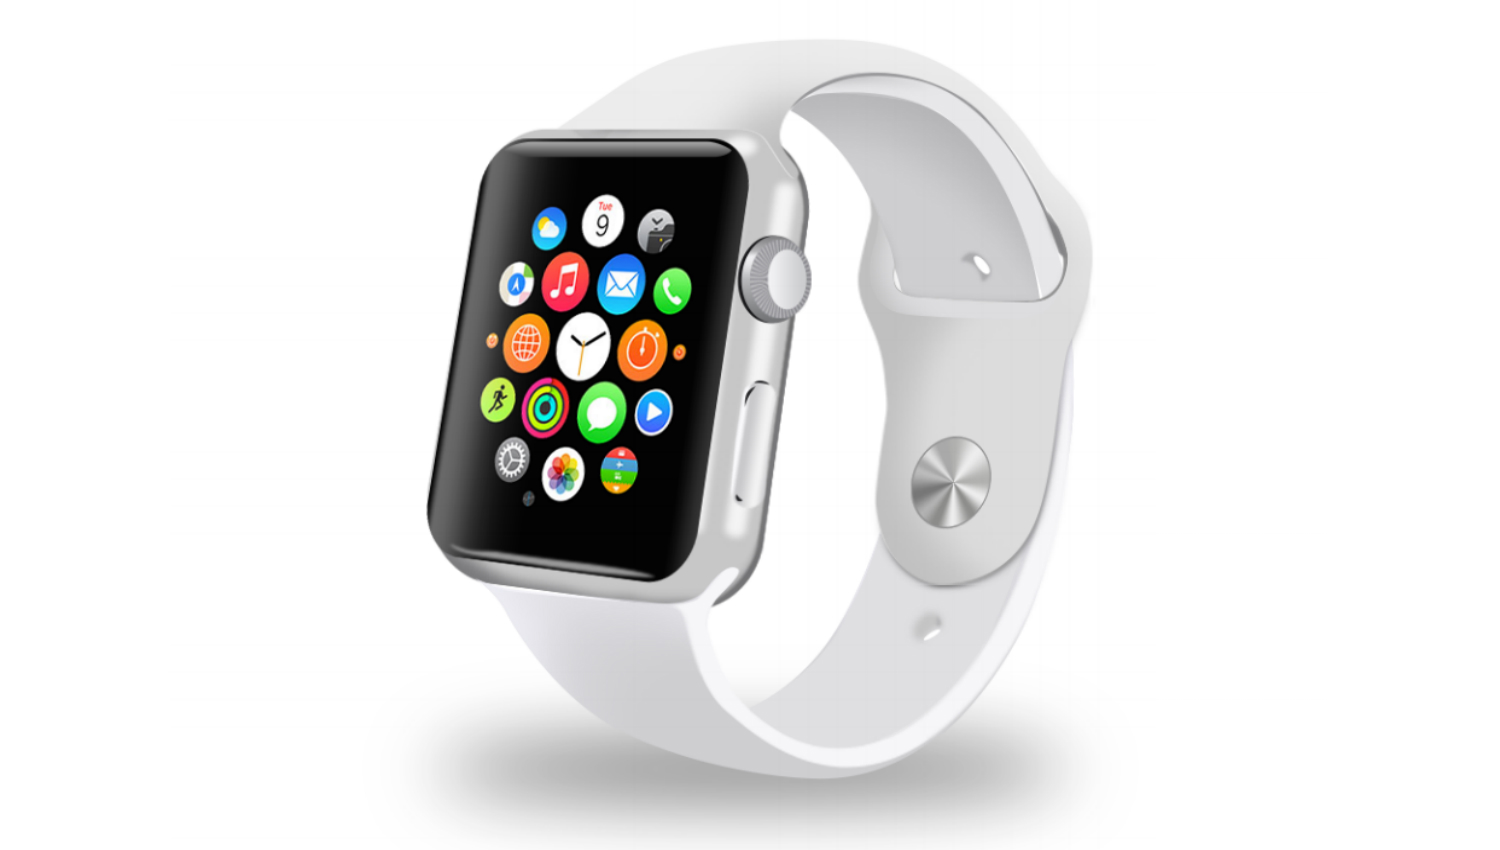 All You Need to Know About Apple Watch – Specs, Prices, and Availability